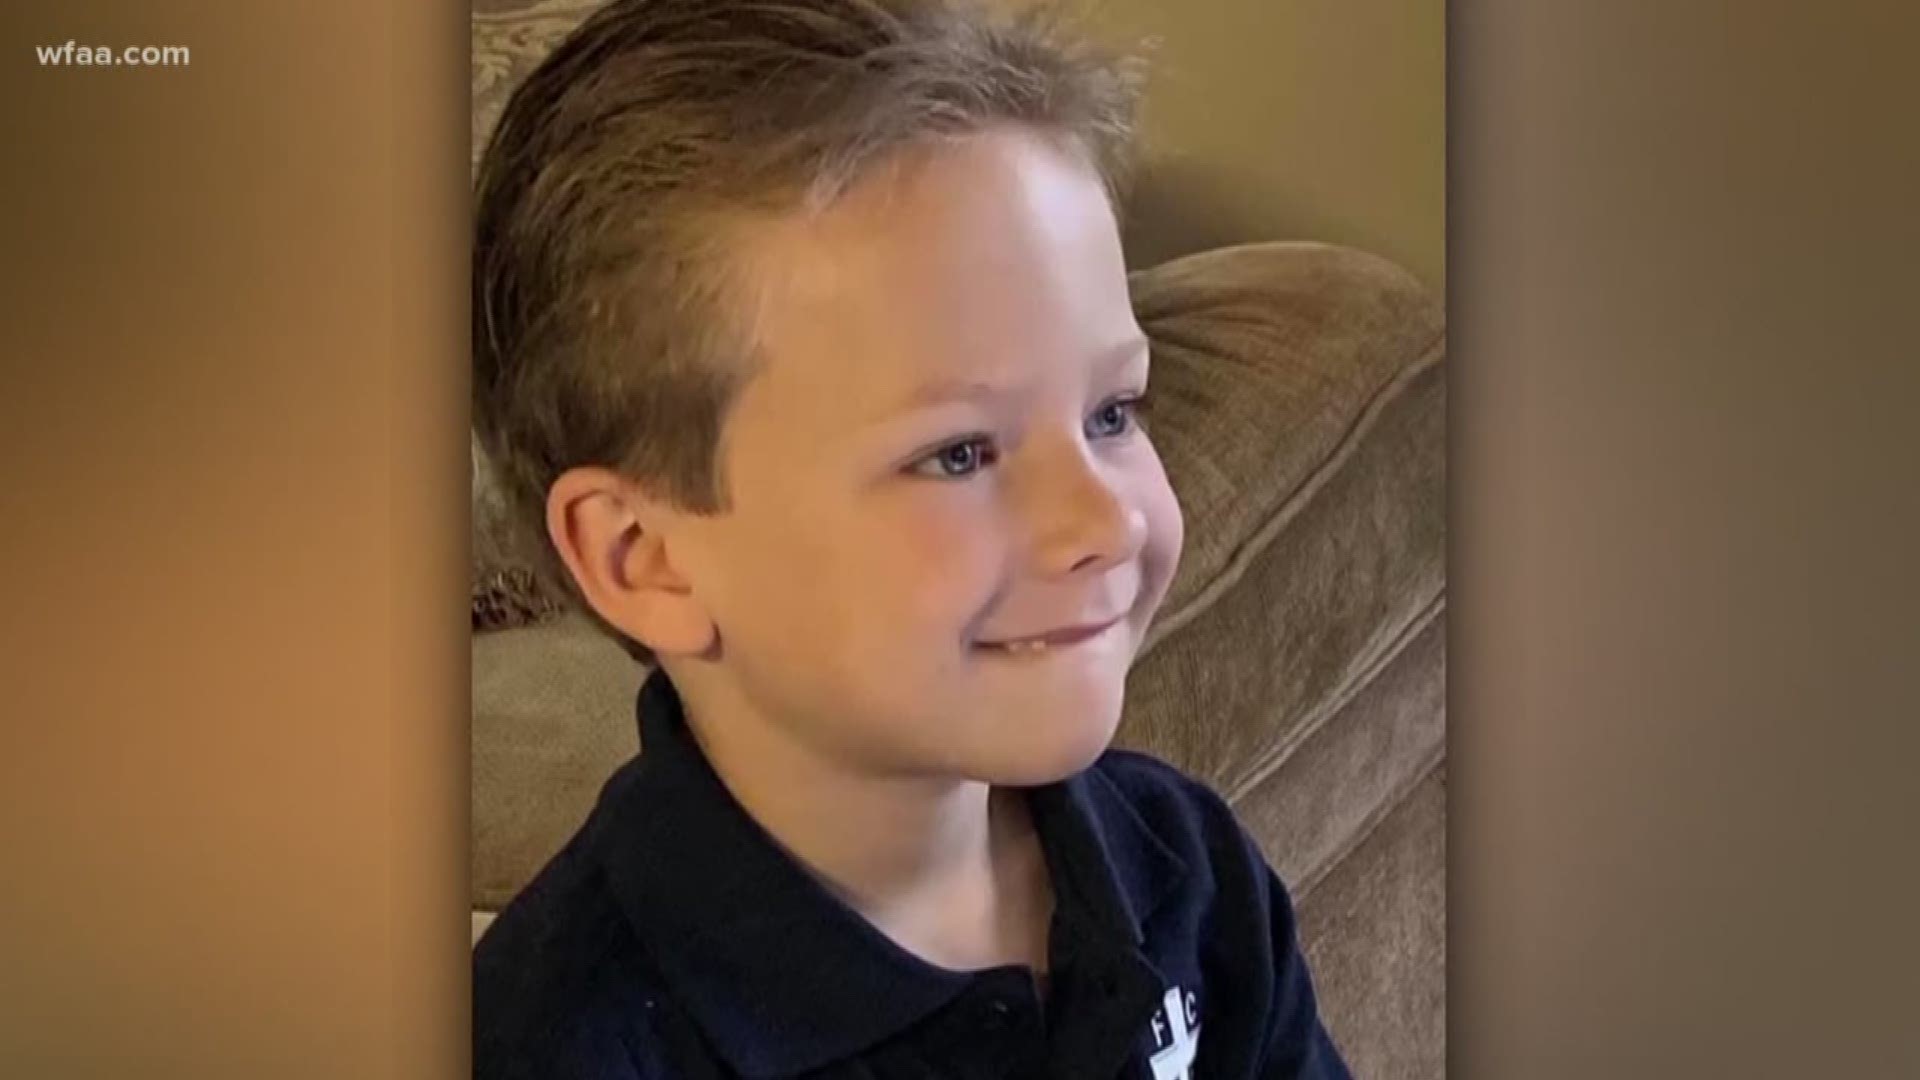 The woman found dead with her 6-year-old son after an Amber Alert was issued did not have custody of her child but was no longer required to be supervised during visits, court records show.